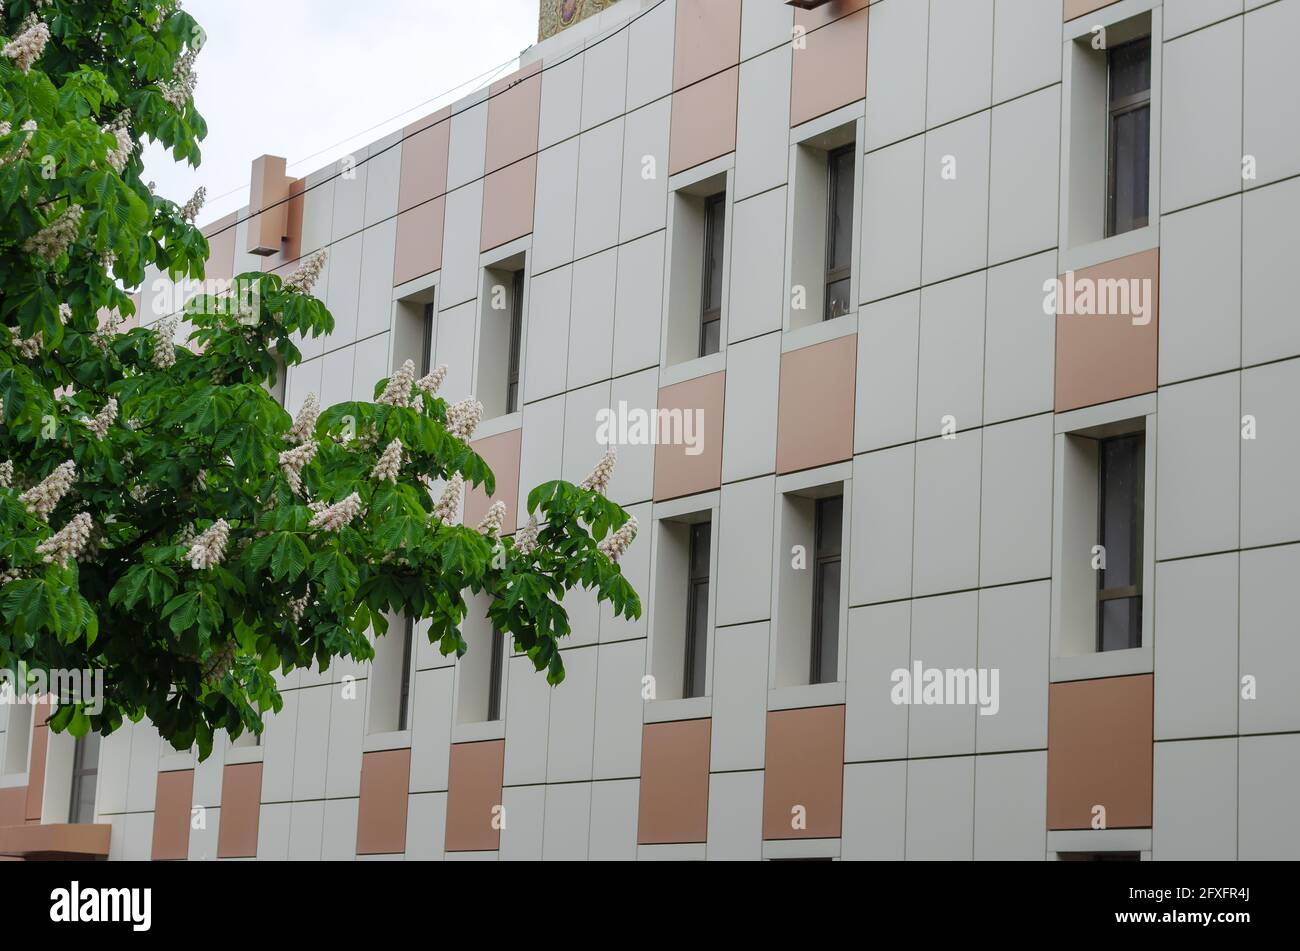 Beige and brown facade of a modern building. Flowering chestnut branches in the foreground. Daytime. Shooting in the rain. Architecture. Stock Photo